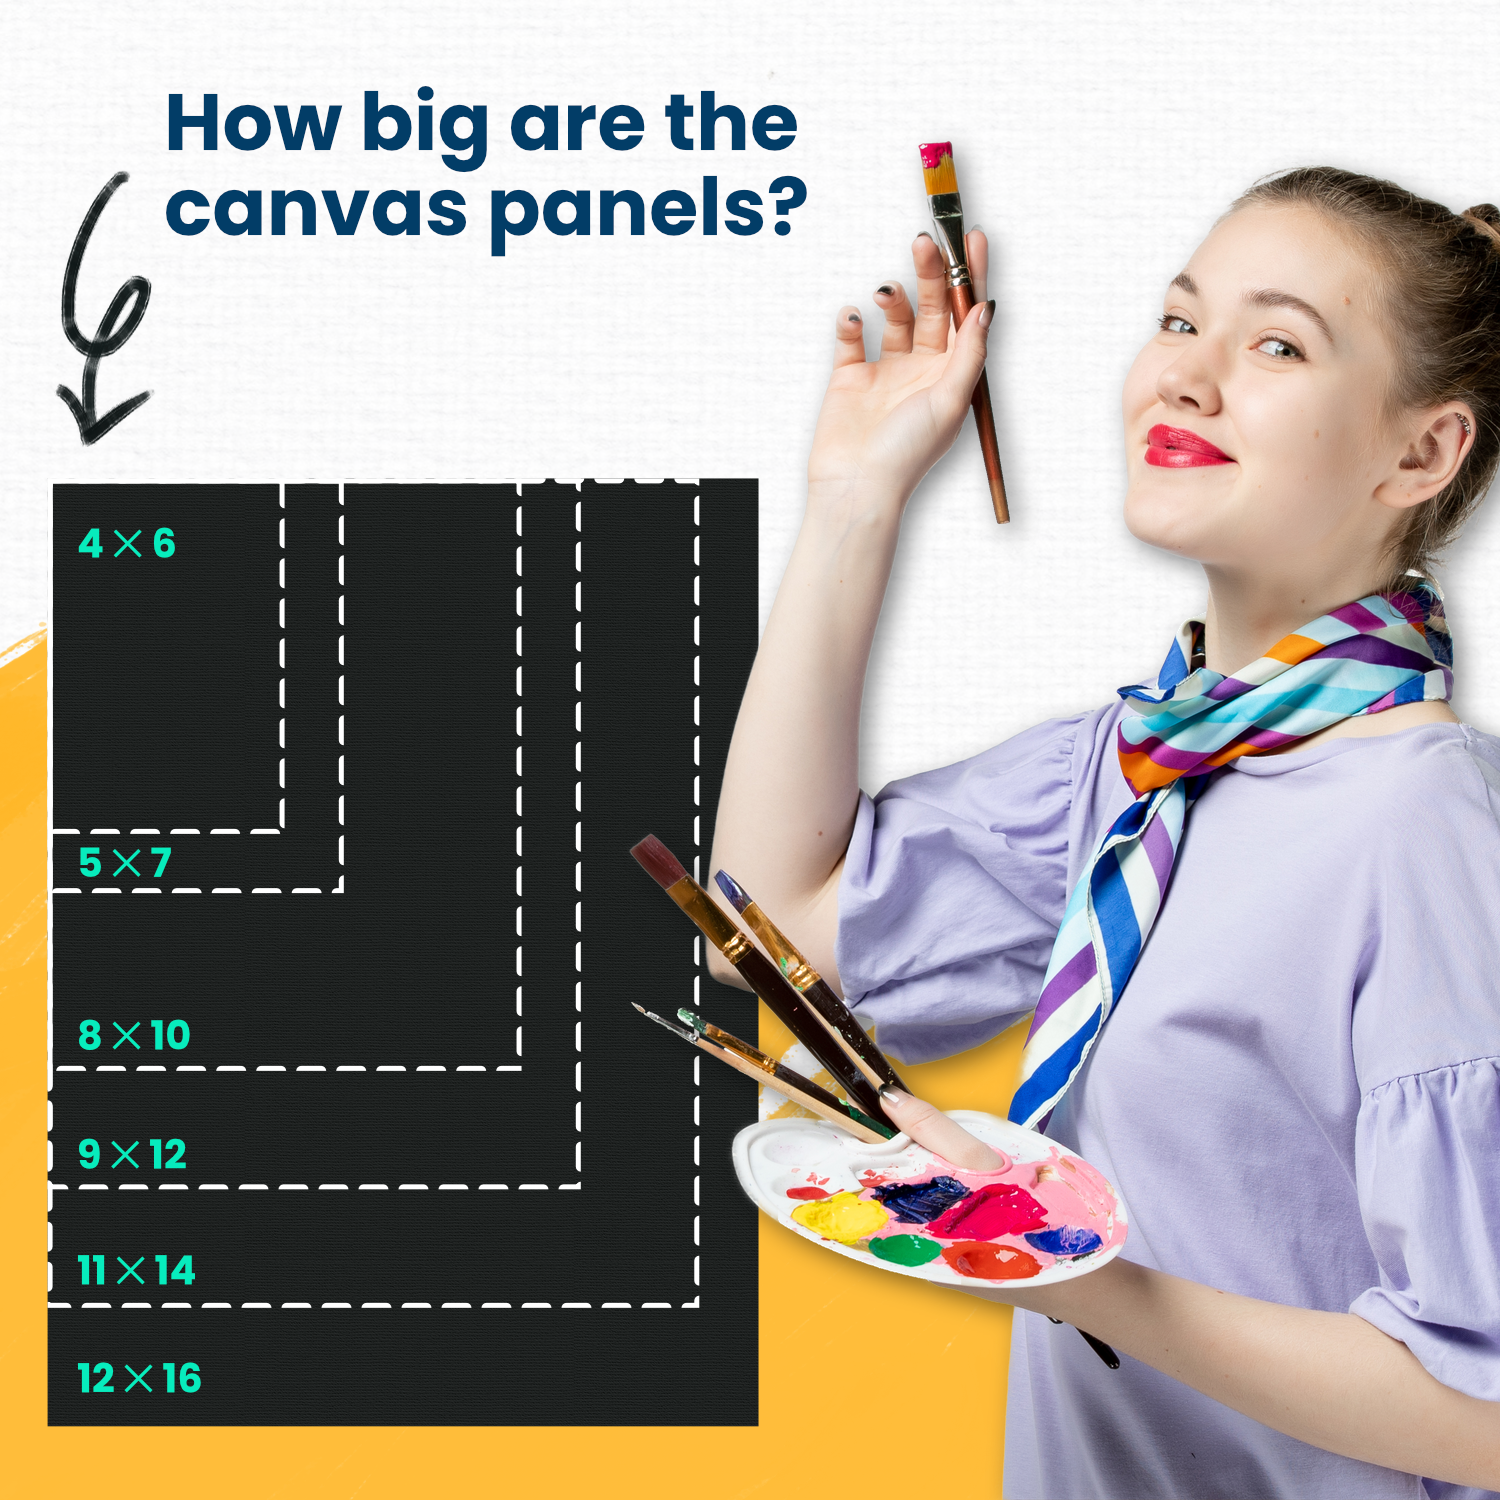 Painting Canvas Panels Multi Pack- 5X7,8X10,9X12,11X14 (9 of Each) –  Loomini